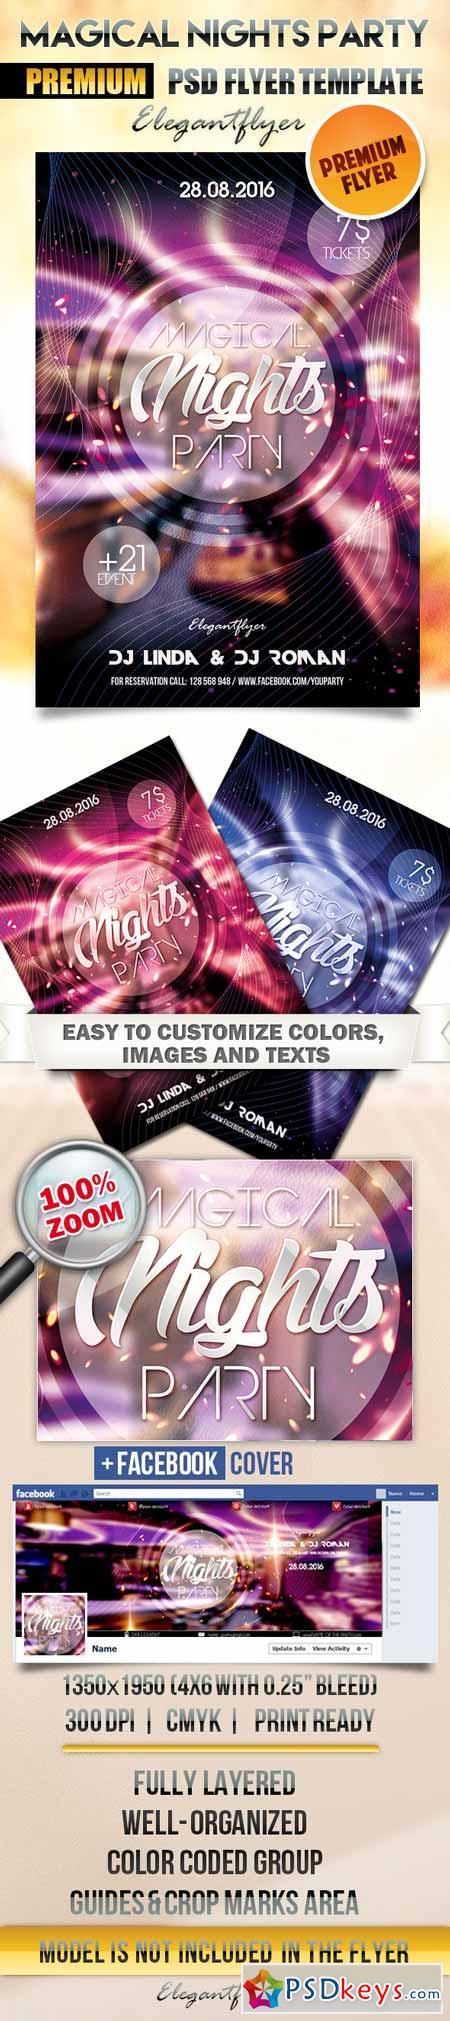 Magical Nights Party  Flyer PSD Template + Facebook Cover